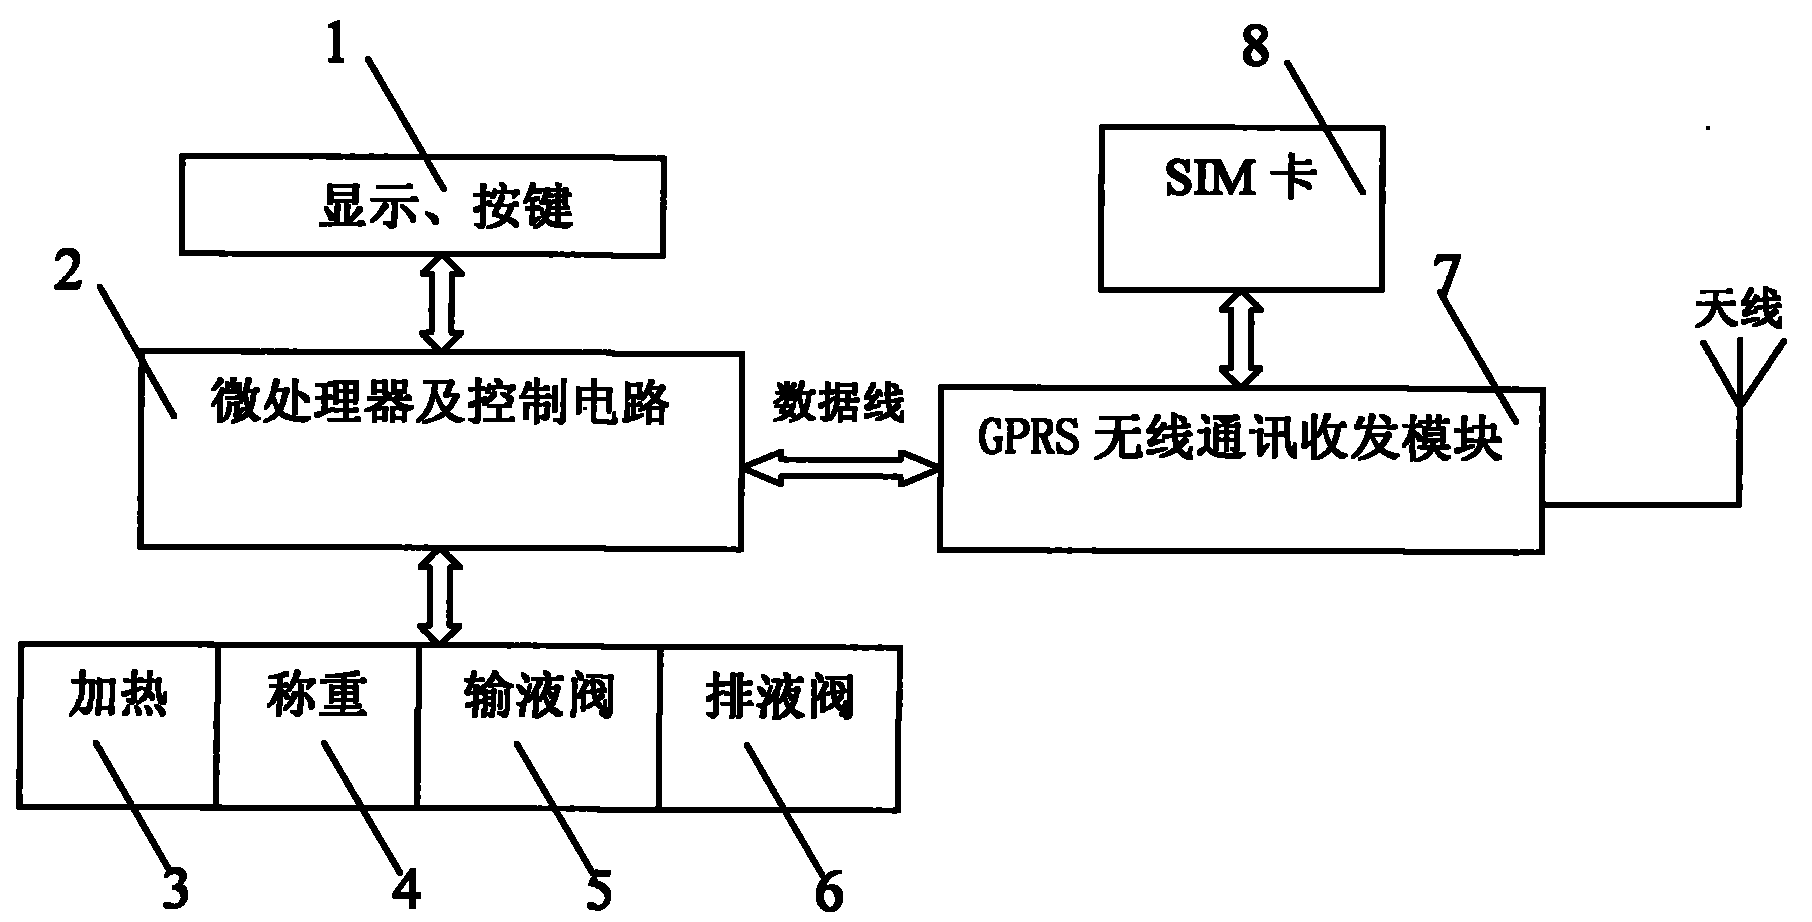 Automatic peritoneal dialysis wireless network system and data transmission method